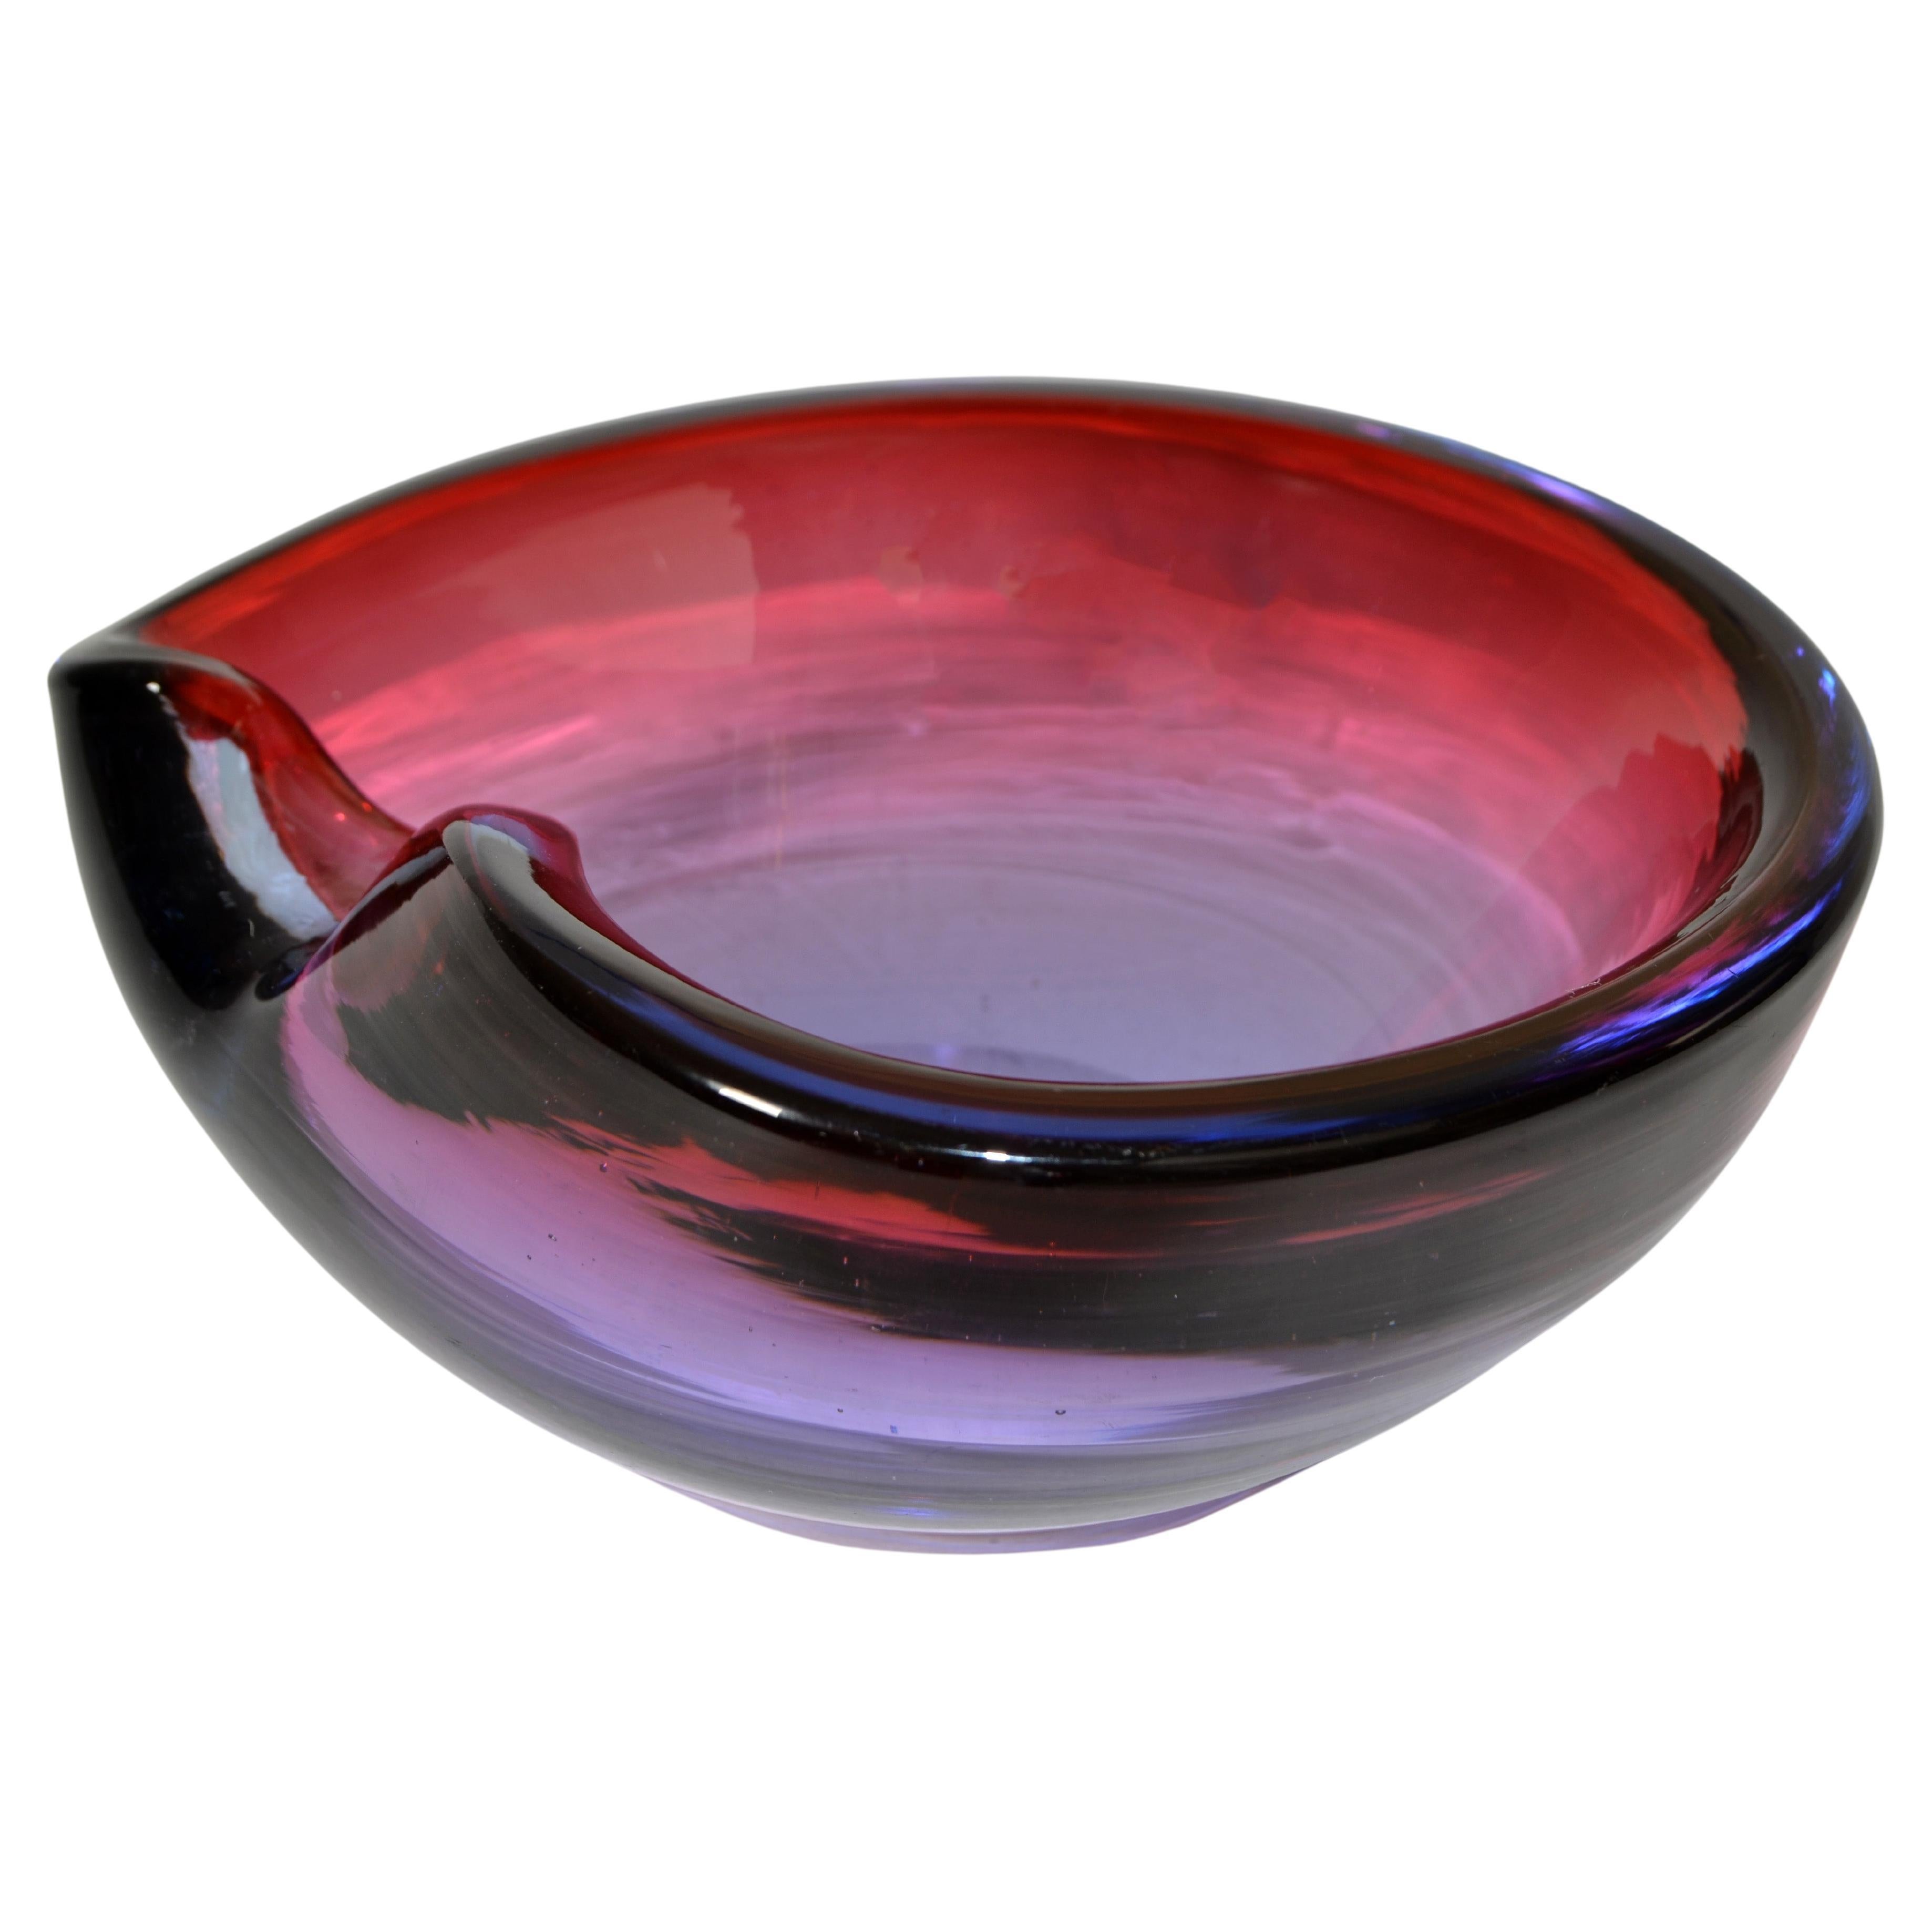 Elegant Italien sculptural hand-blown Murano art glass decorative bowl, Ashtray in dark pink, blue, and clear tone.
The bowl is very heavy.
Simply lovely on Top of the Hallway Entry Console, Dresser in the Bedroom, Shelving Unit or Living Room Side